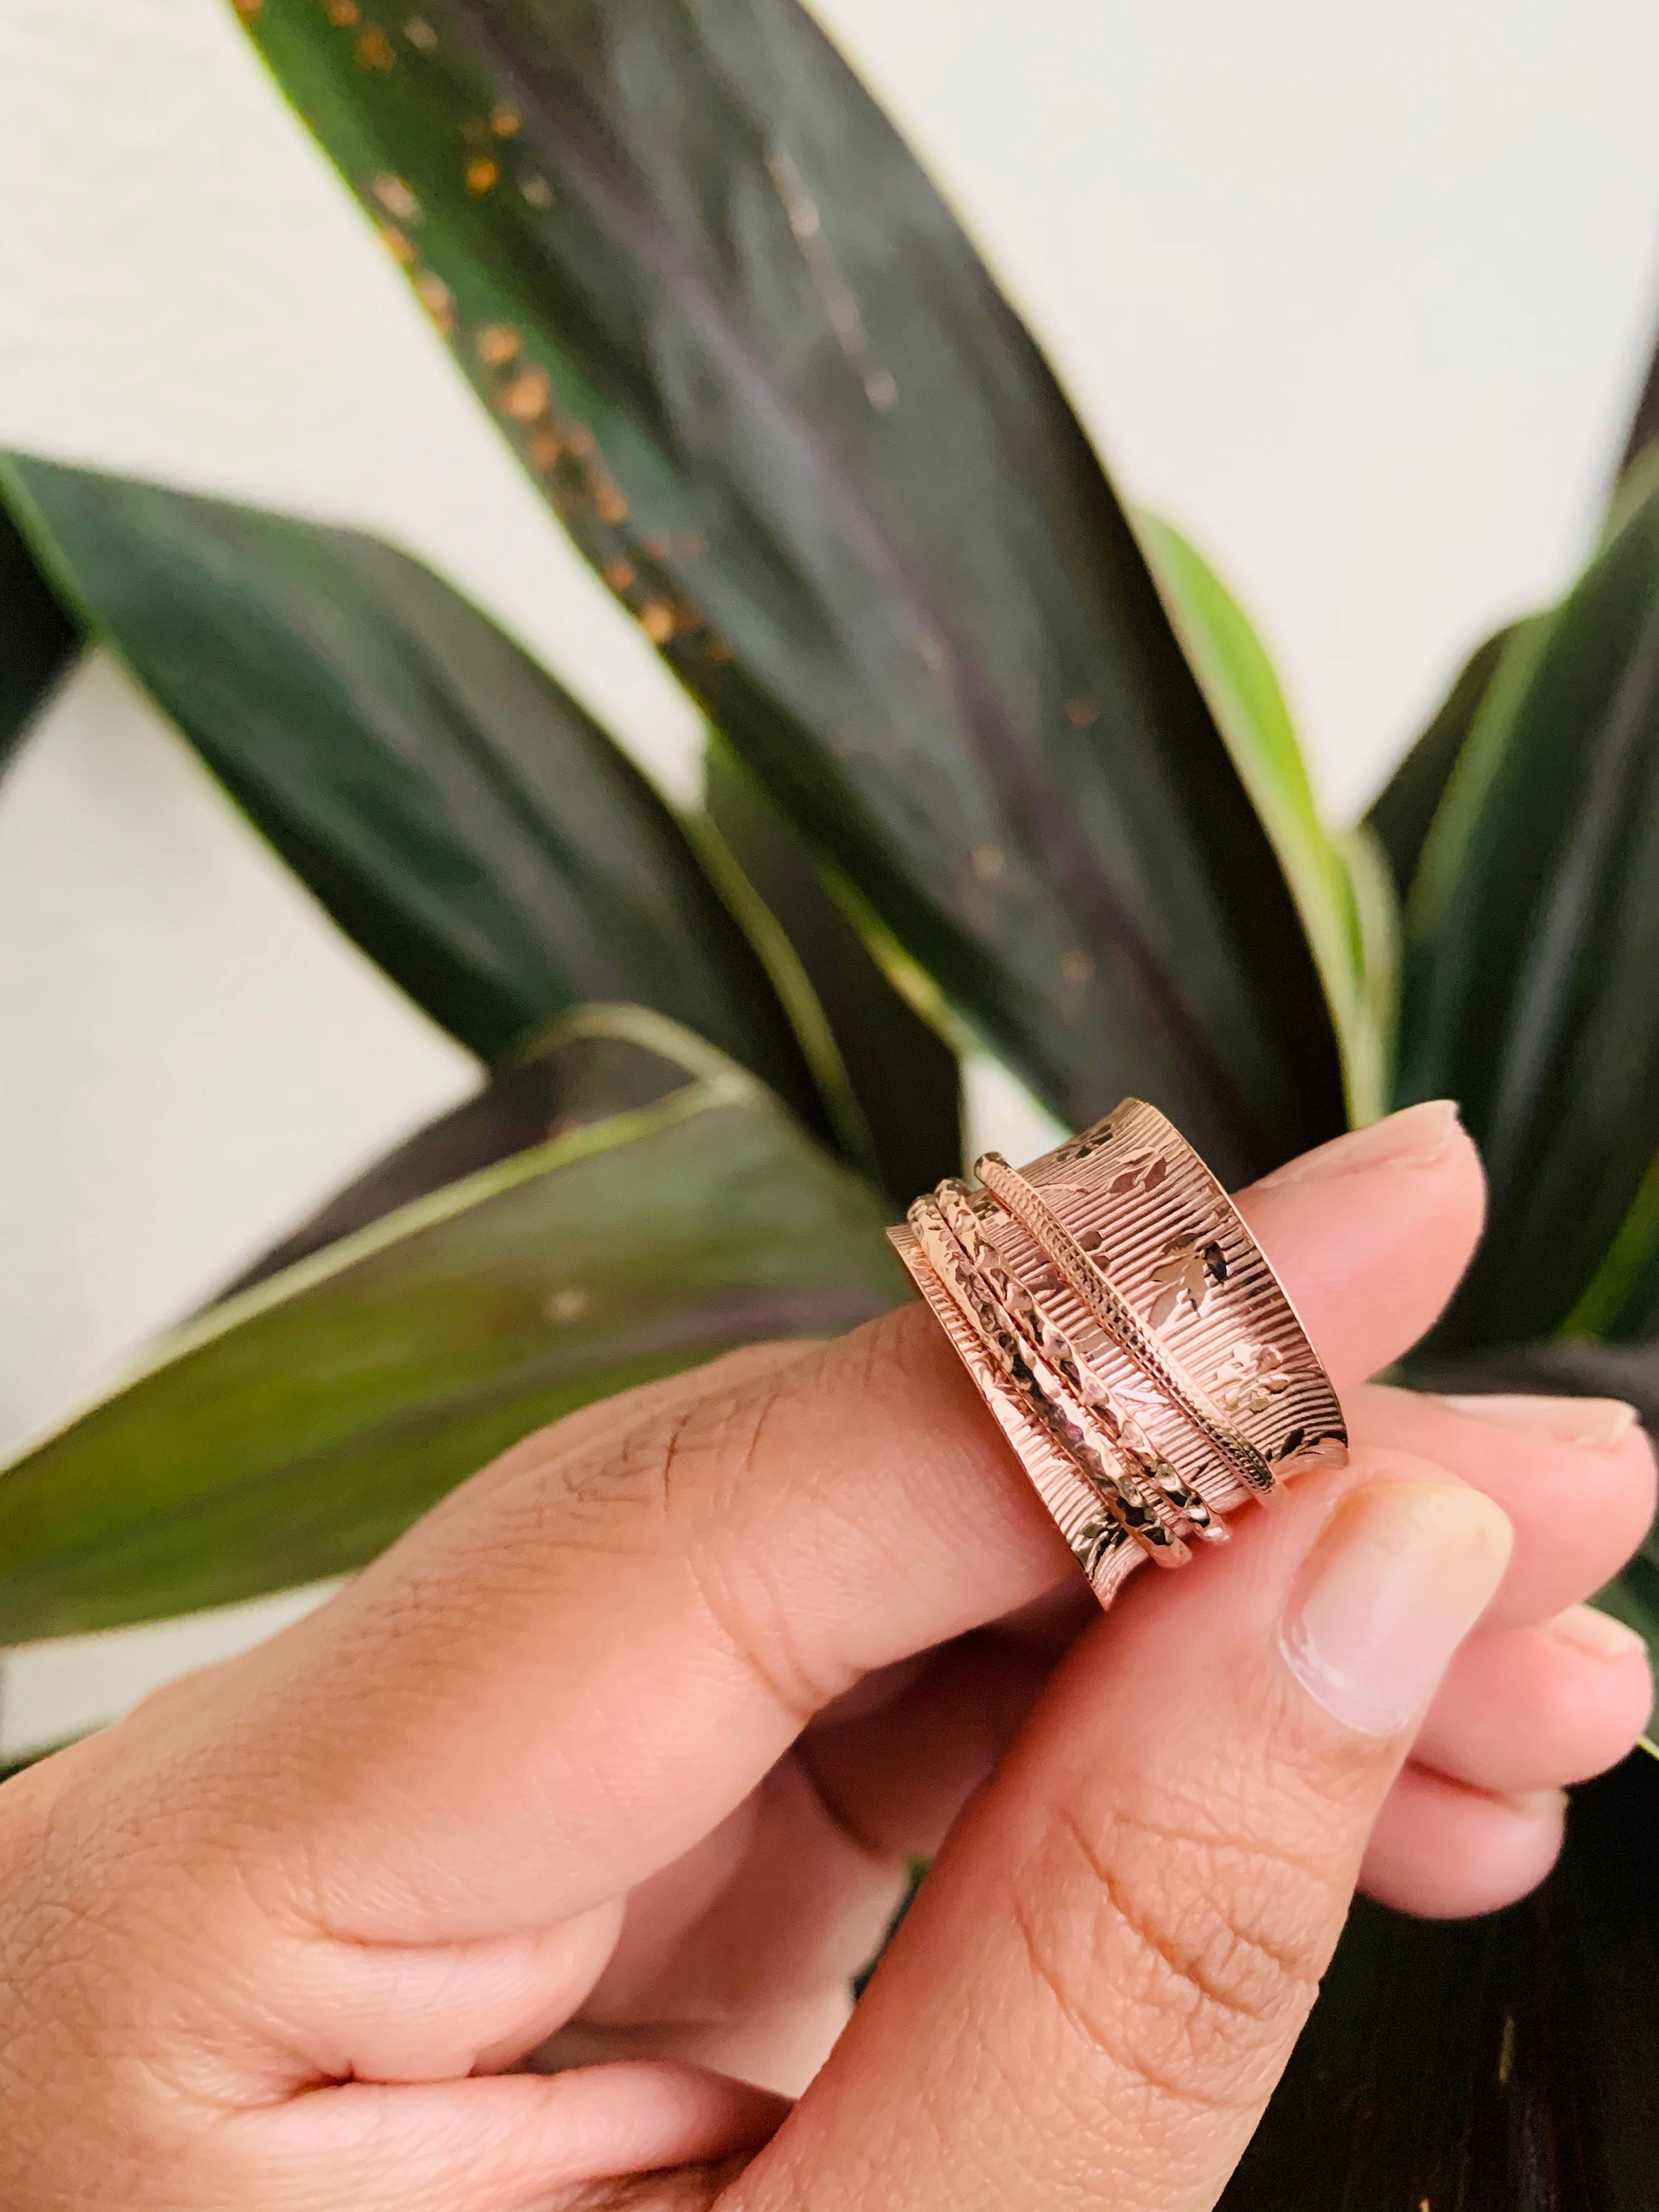 Metal Craft Rings, Rose Gold, various sizes – Stay Cozy Creative Co.